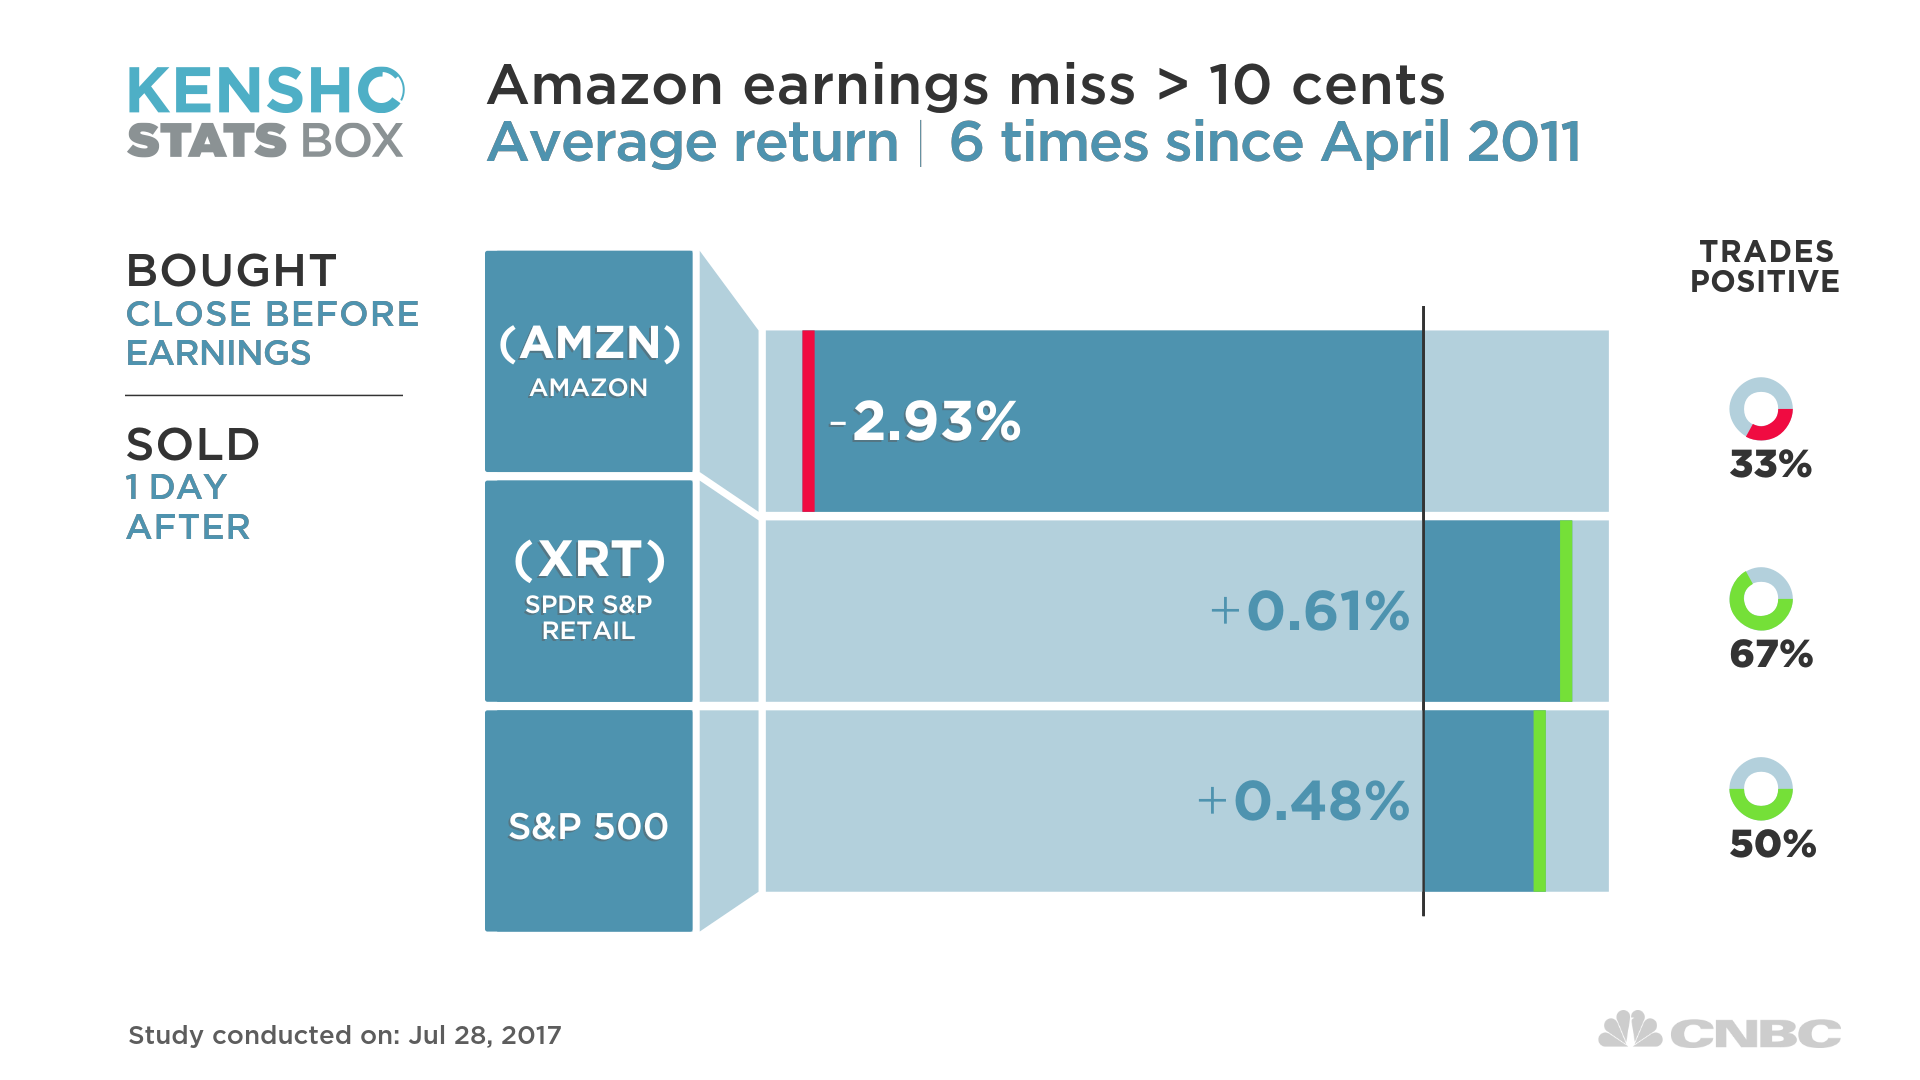 Amazon's stock may struggle awhile after this epic earnings miss, history shows